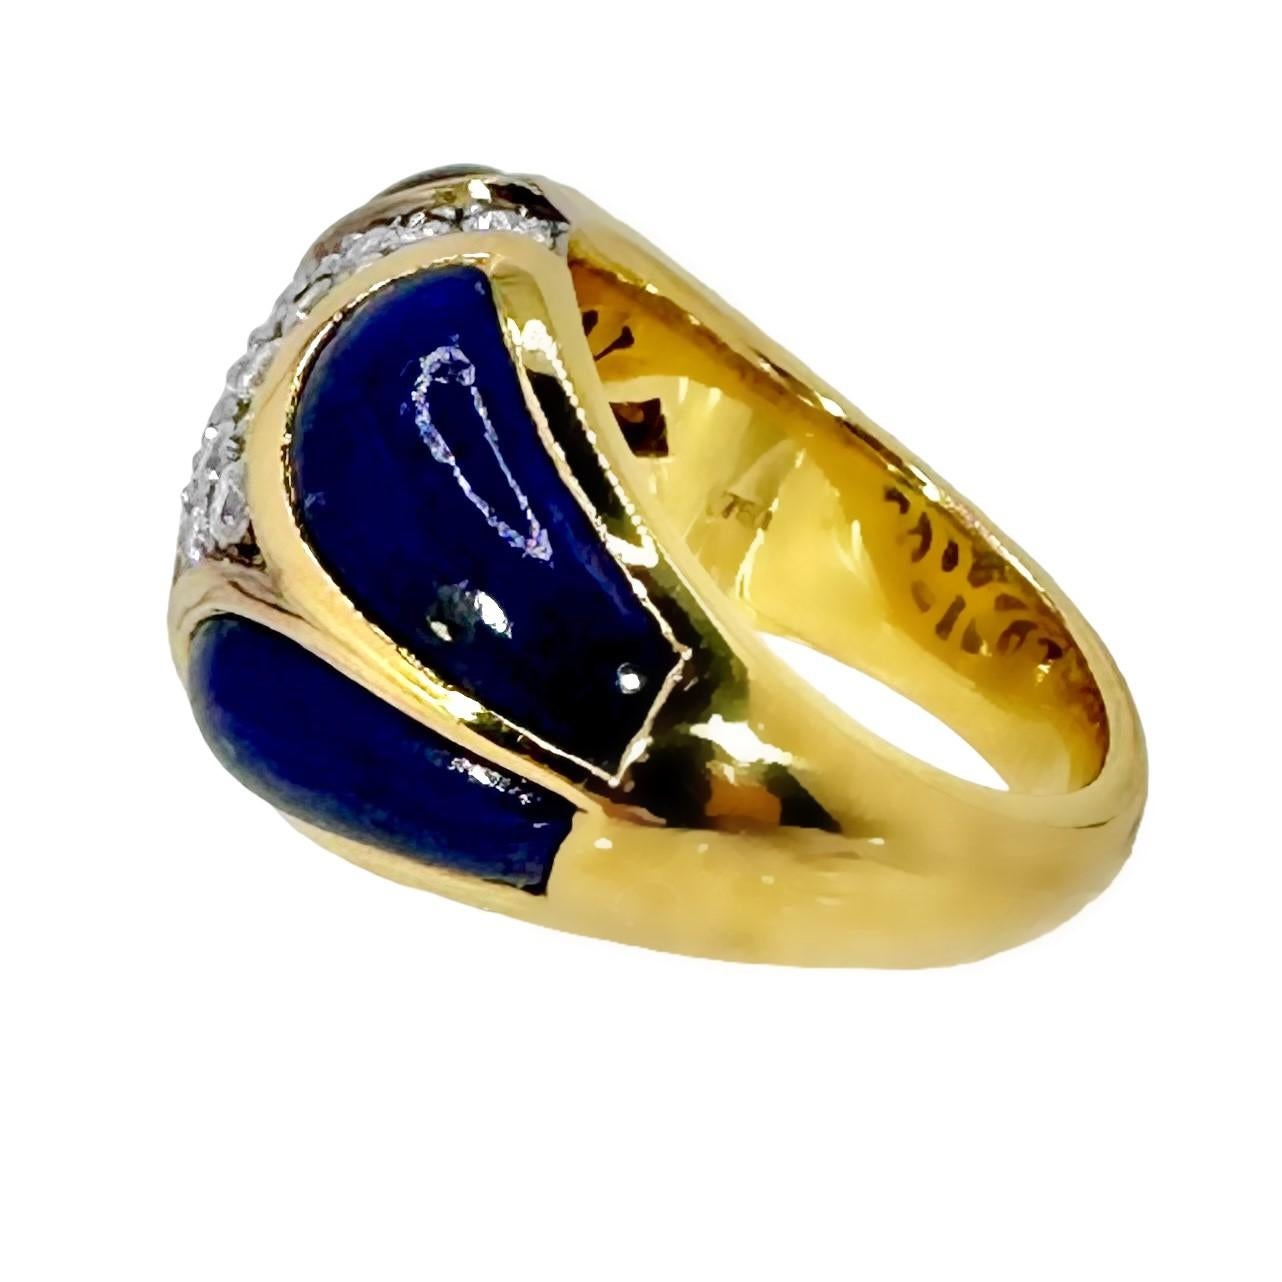 Late-20th Century 18k Yellow Gold, Lapis-Lazuli and Diamond Fashion Ring In Good Condition For Sale In Palm Beach, FL